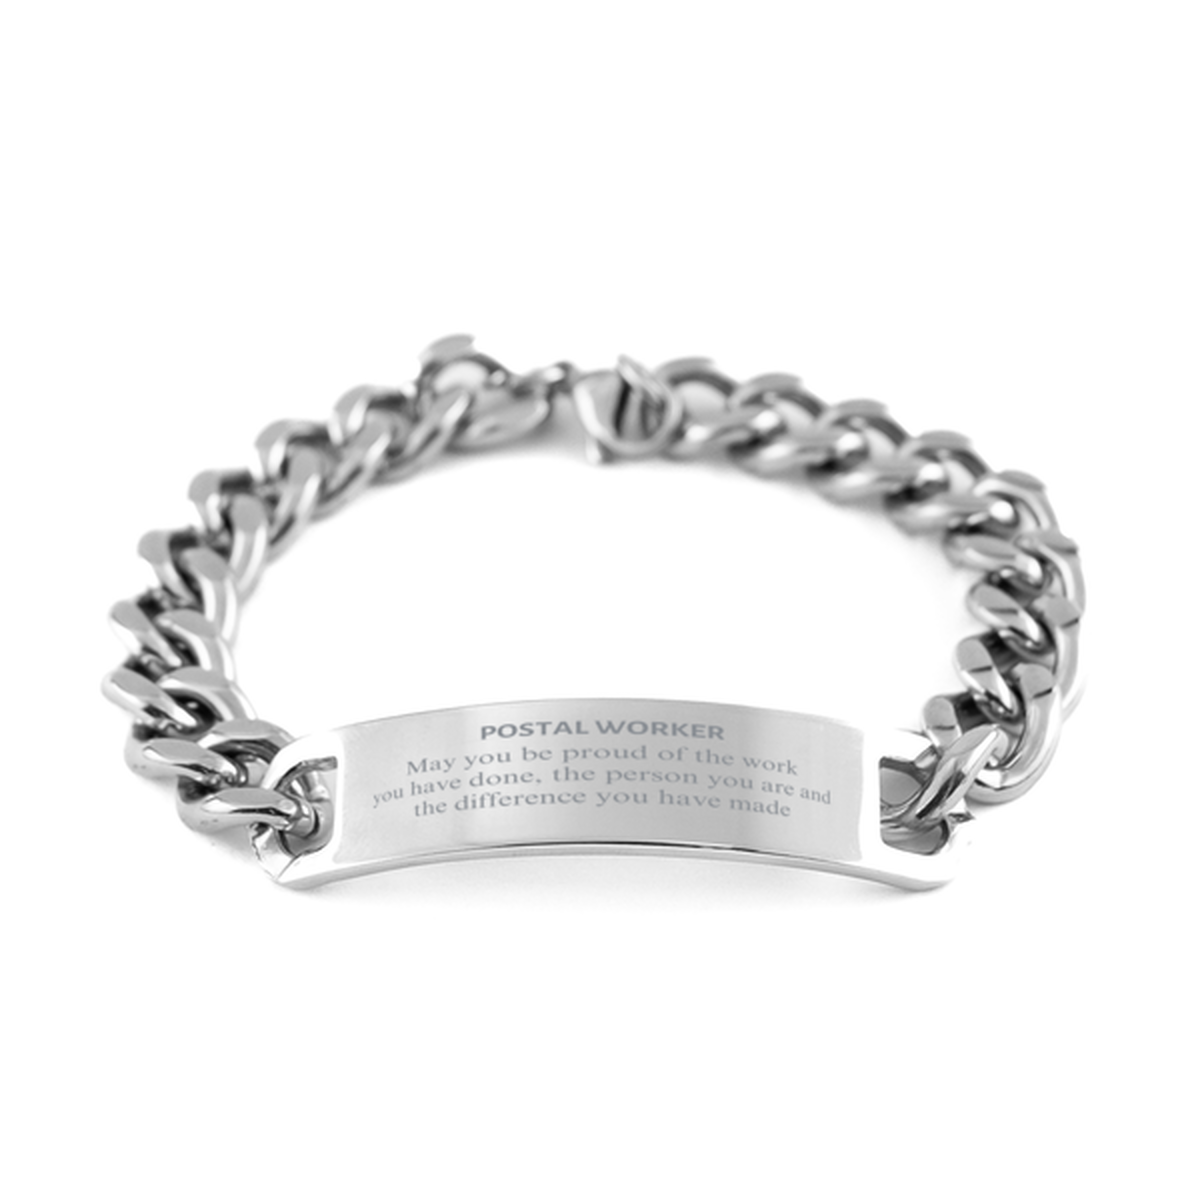 Postal Worker May you be proud of the work you have done, Retirement Postal Worker Cuban Chain Stainless Steel Bracelet for Colleague Appreciation Gifts Amazing for Postal Worker